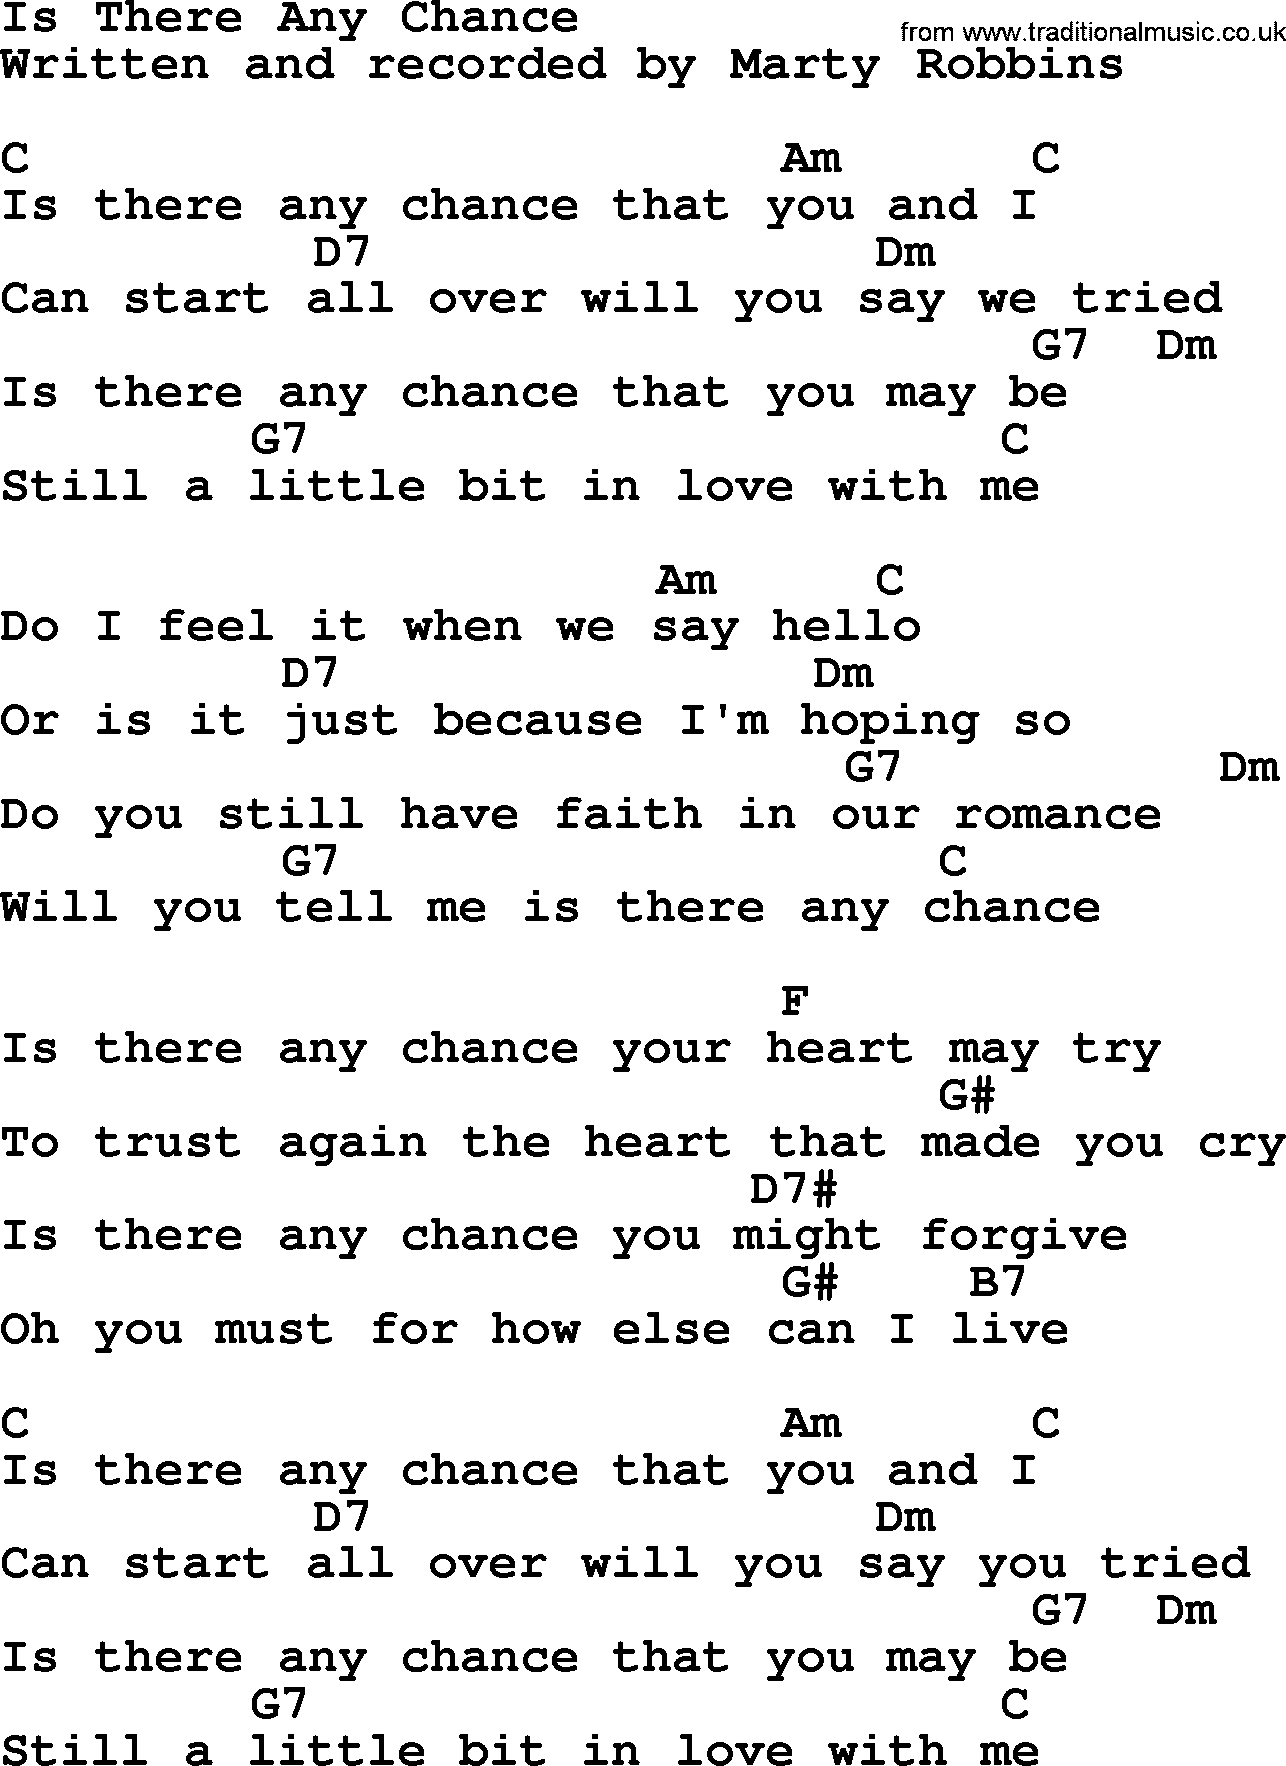 Marty Robbins song: Is There Any Chance, lyrics and chords